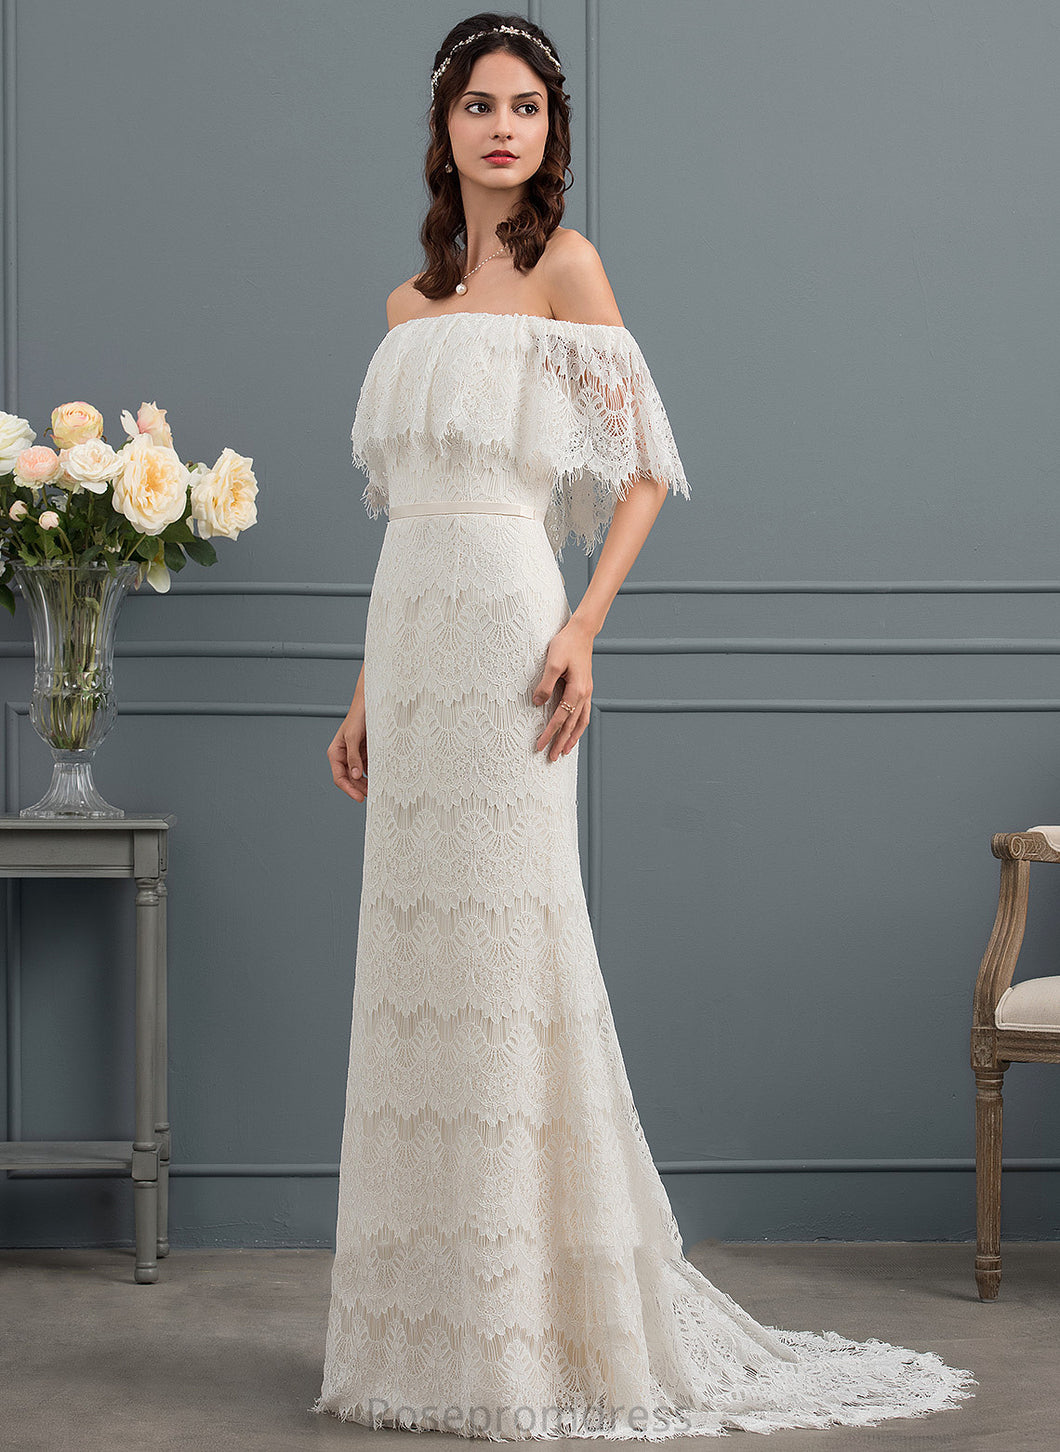 Wedding Dresses Wedding Train Off-the-Shoulder Trumpet/Mermaid Lace Sweep Bow(s) With Jeanie Dress